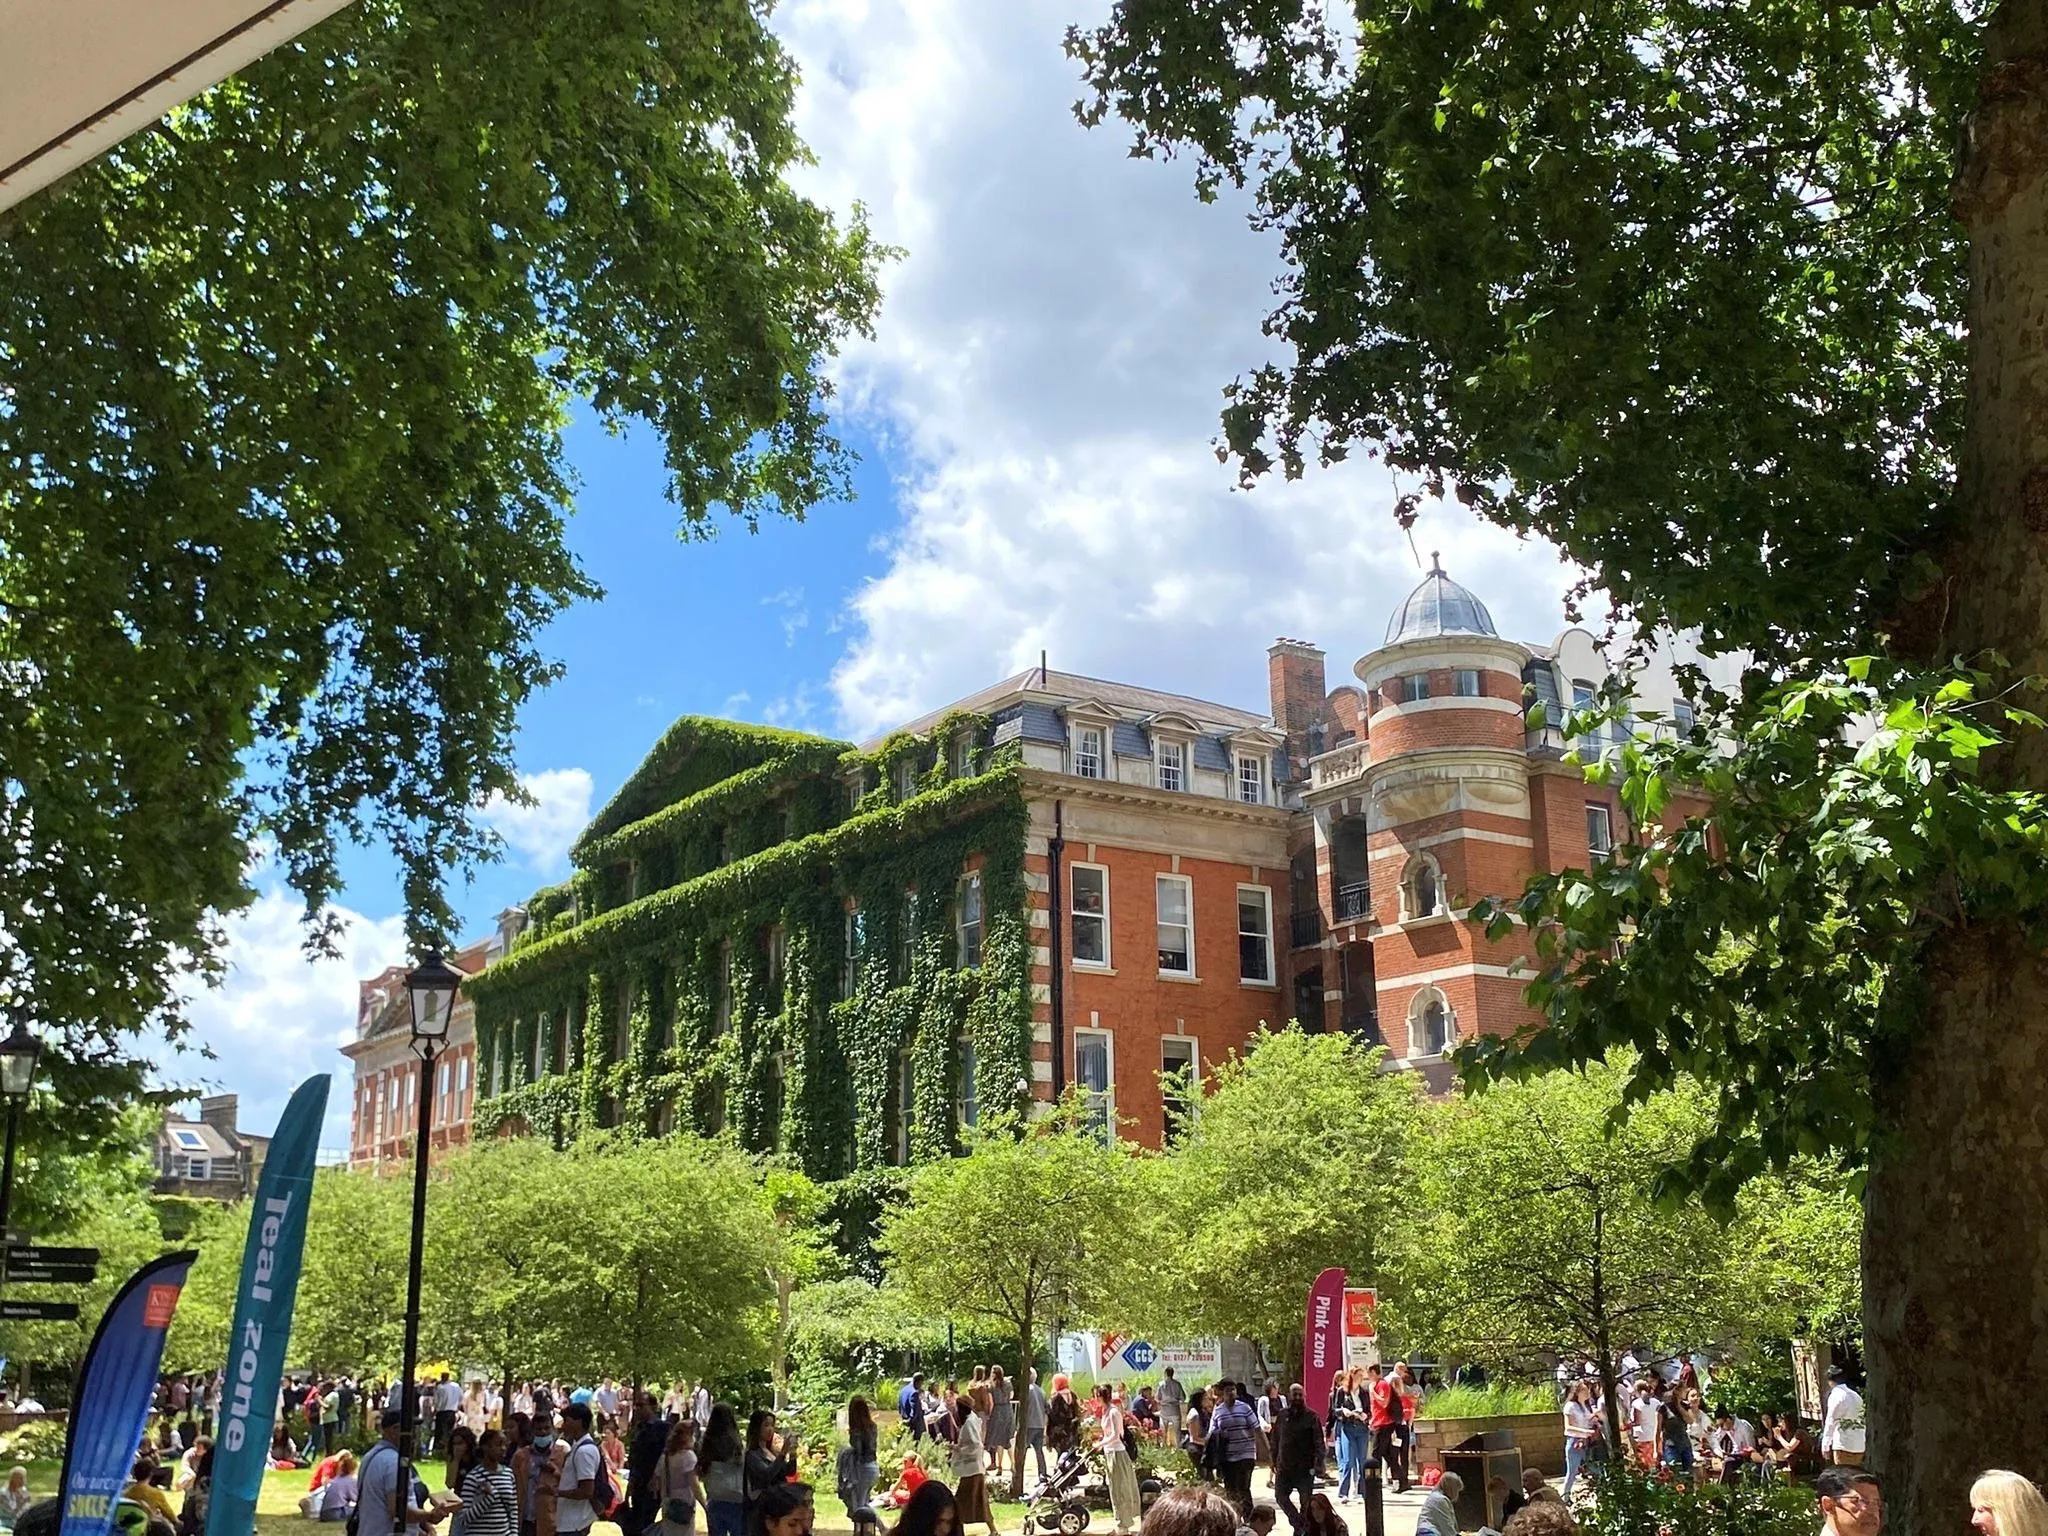 King's College London's Guy's Campus on a sunny day, trees frame the image and the building is covered in wall climbing plants.